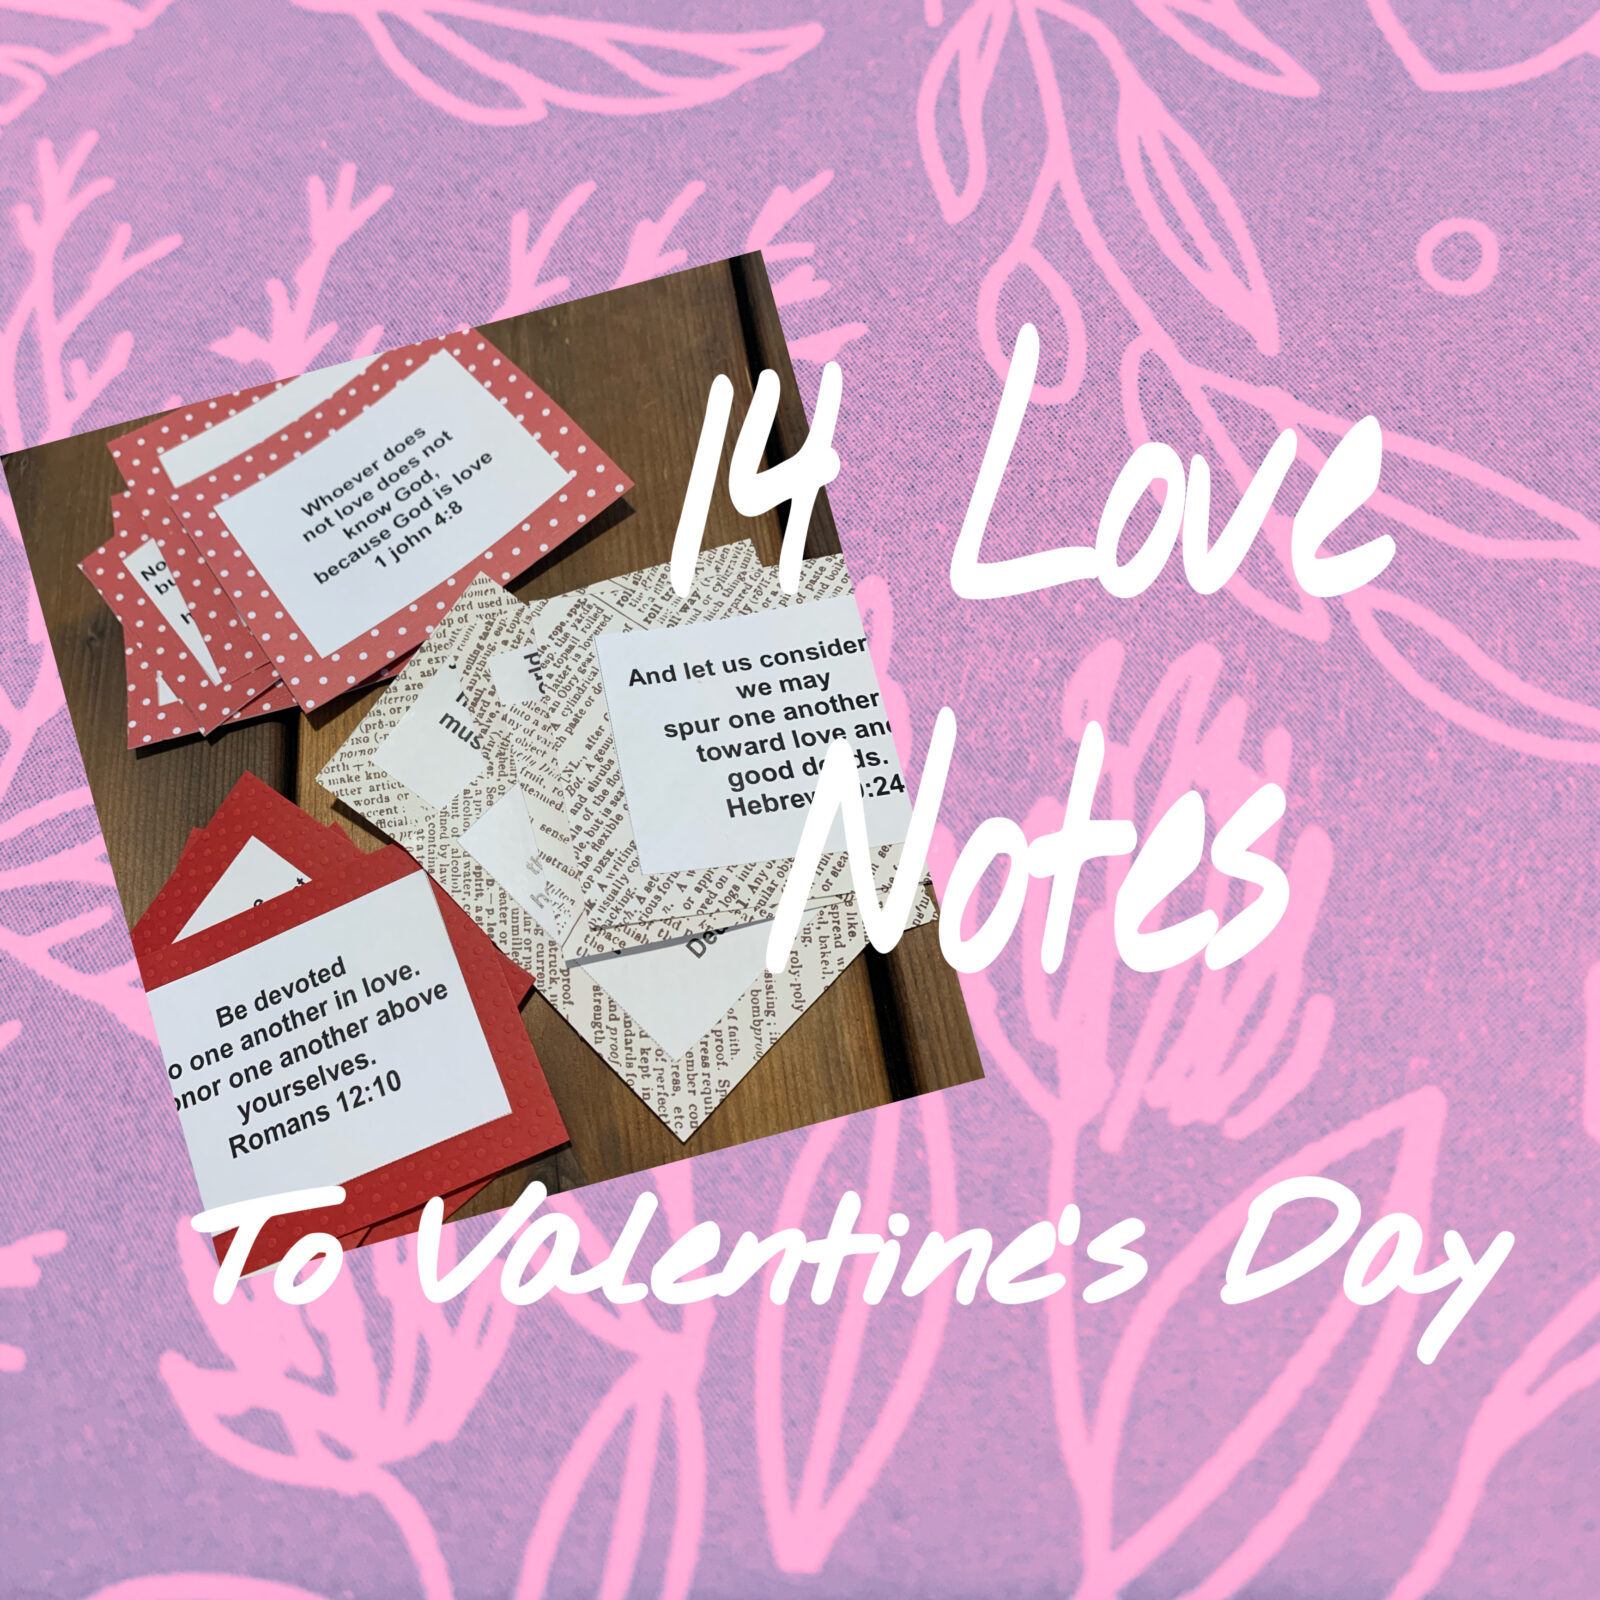 14 love notes to Valentine's Day